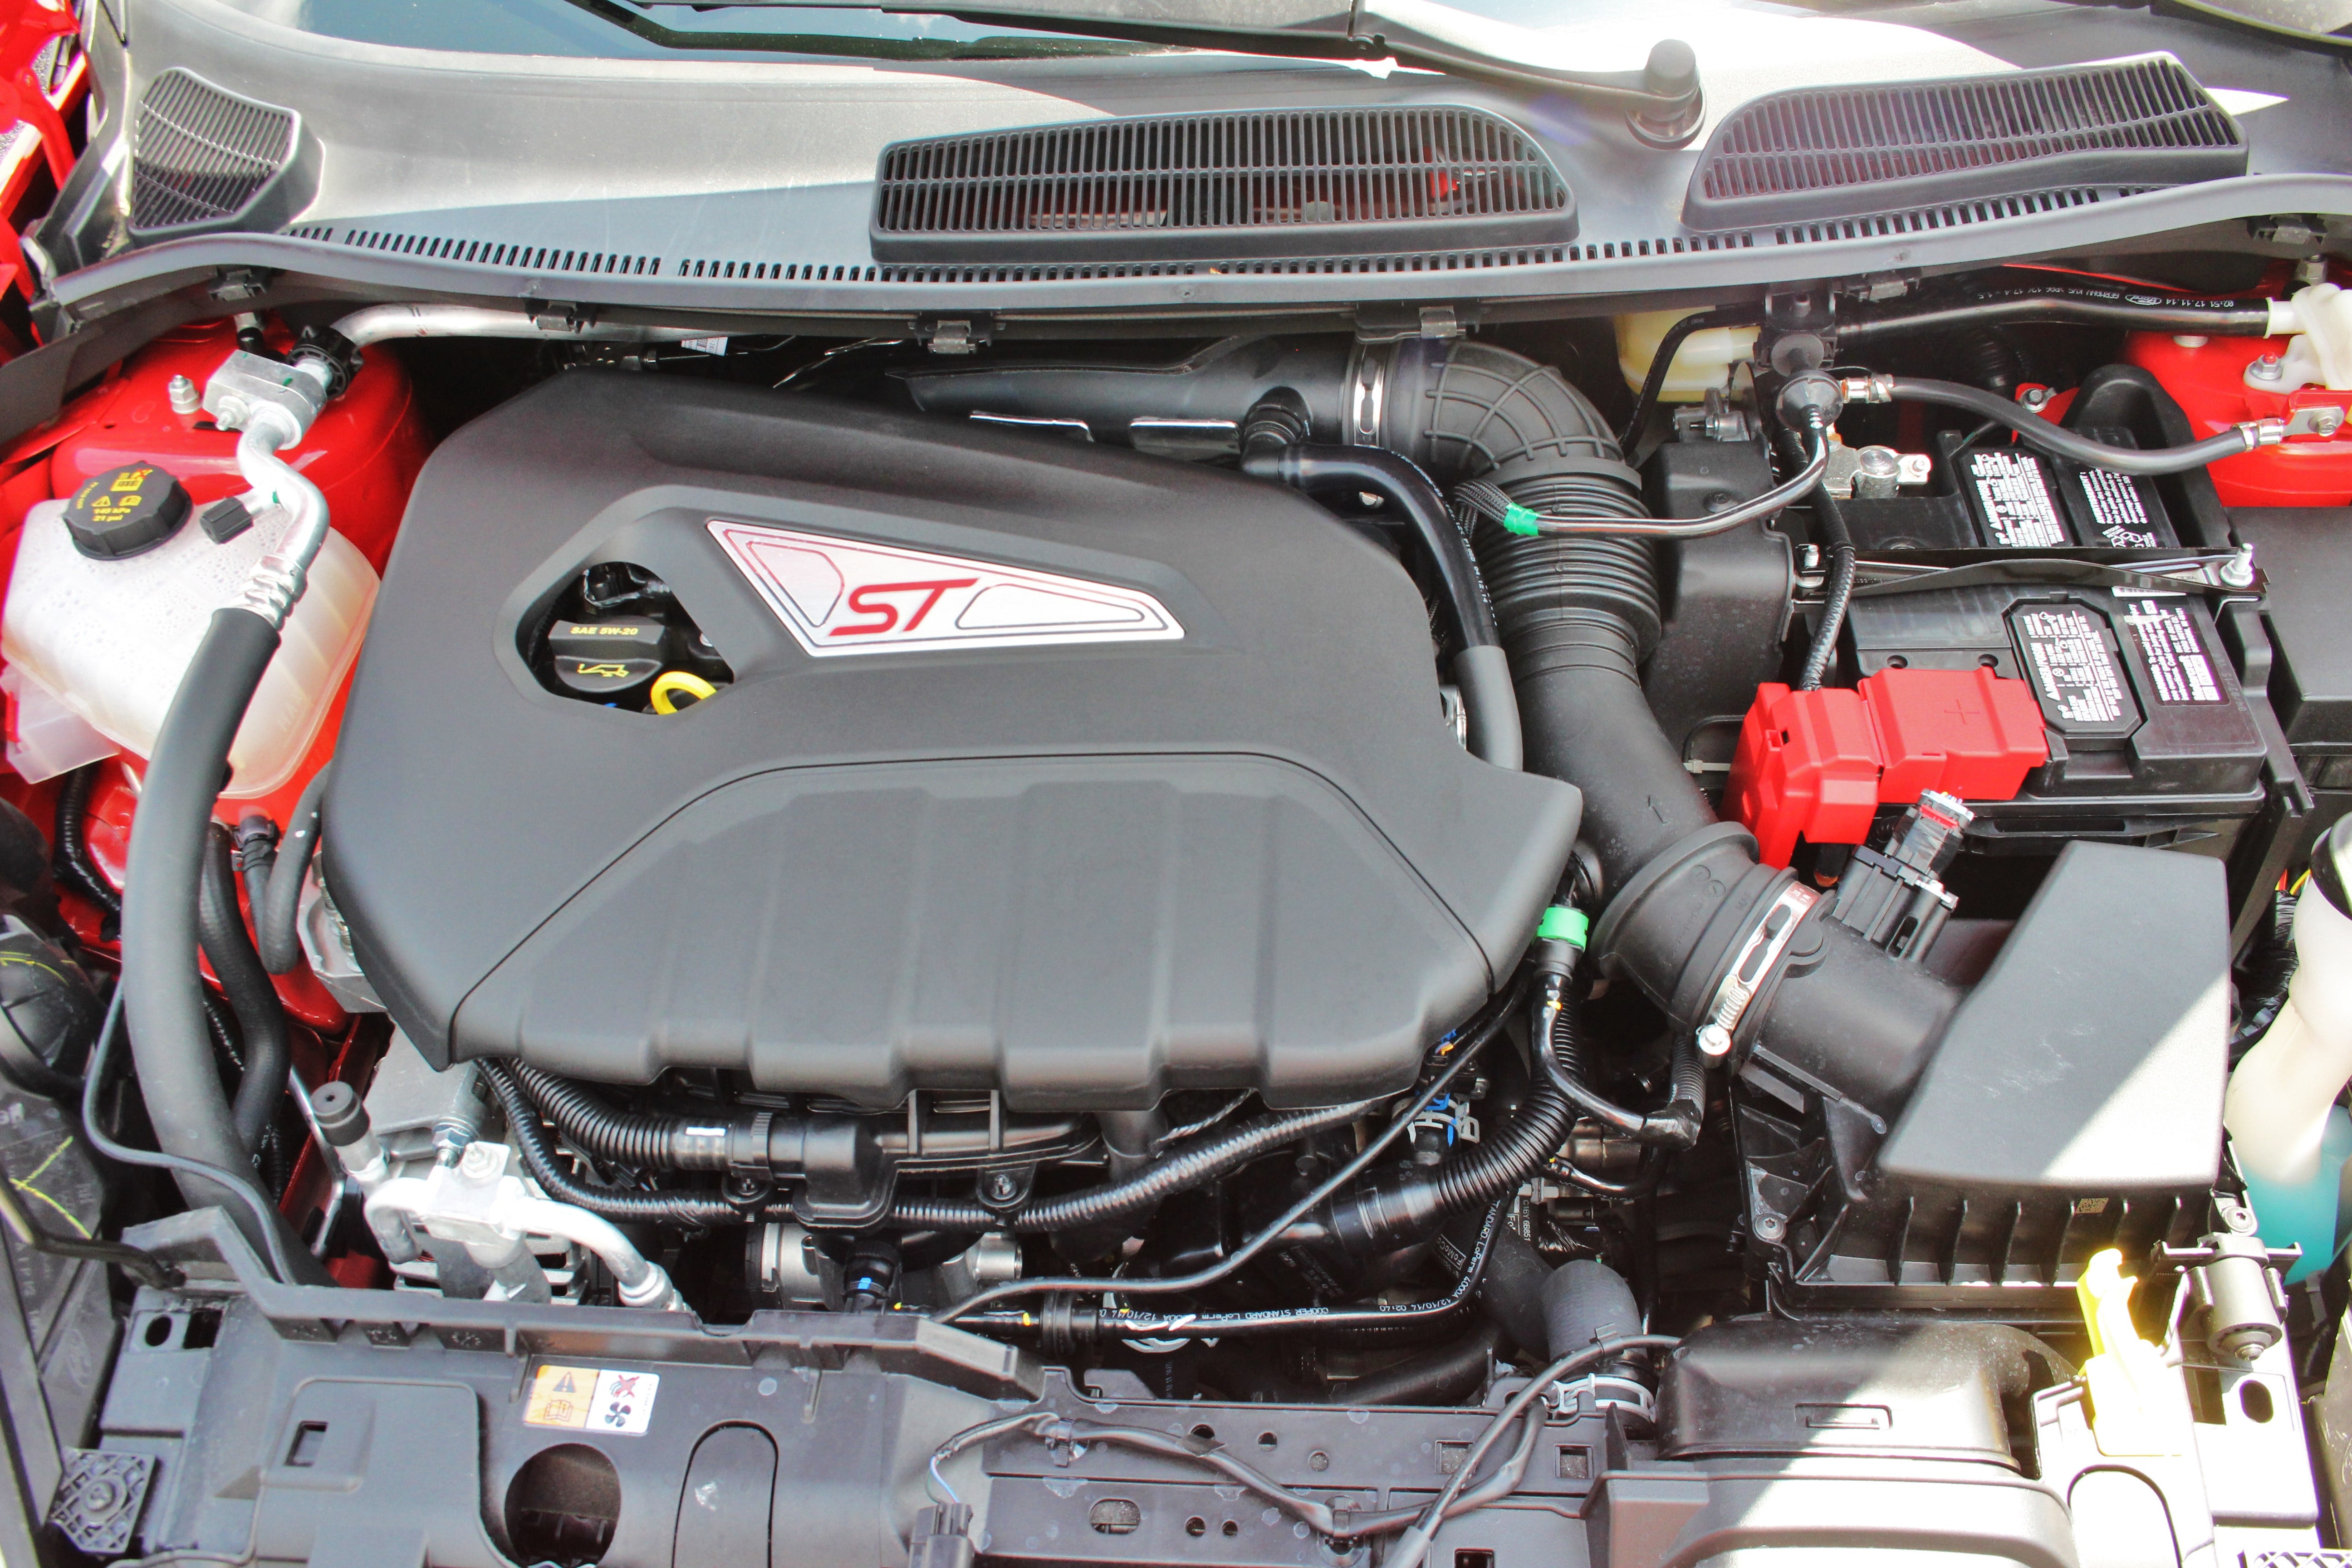 Fresh Air for the Fiesta! ST Performance Intake R&D, Part 1: Stock Intake & Data Collection